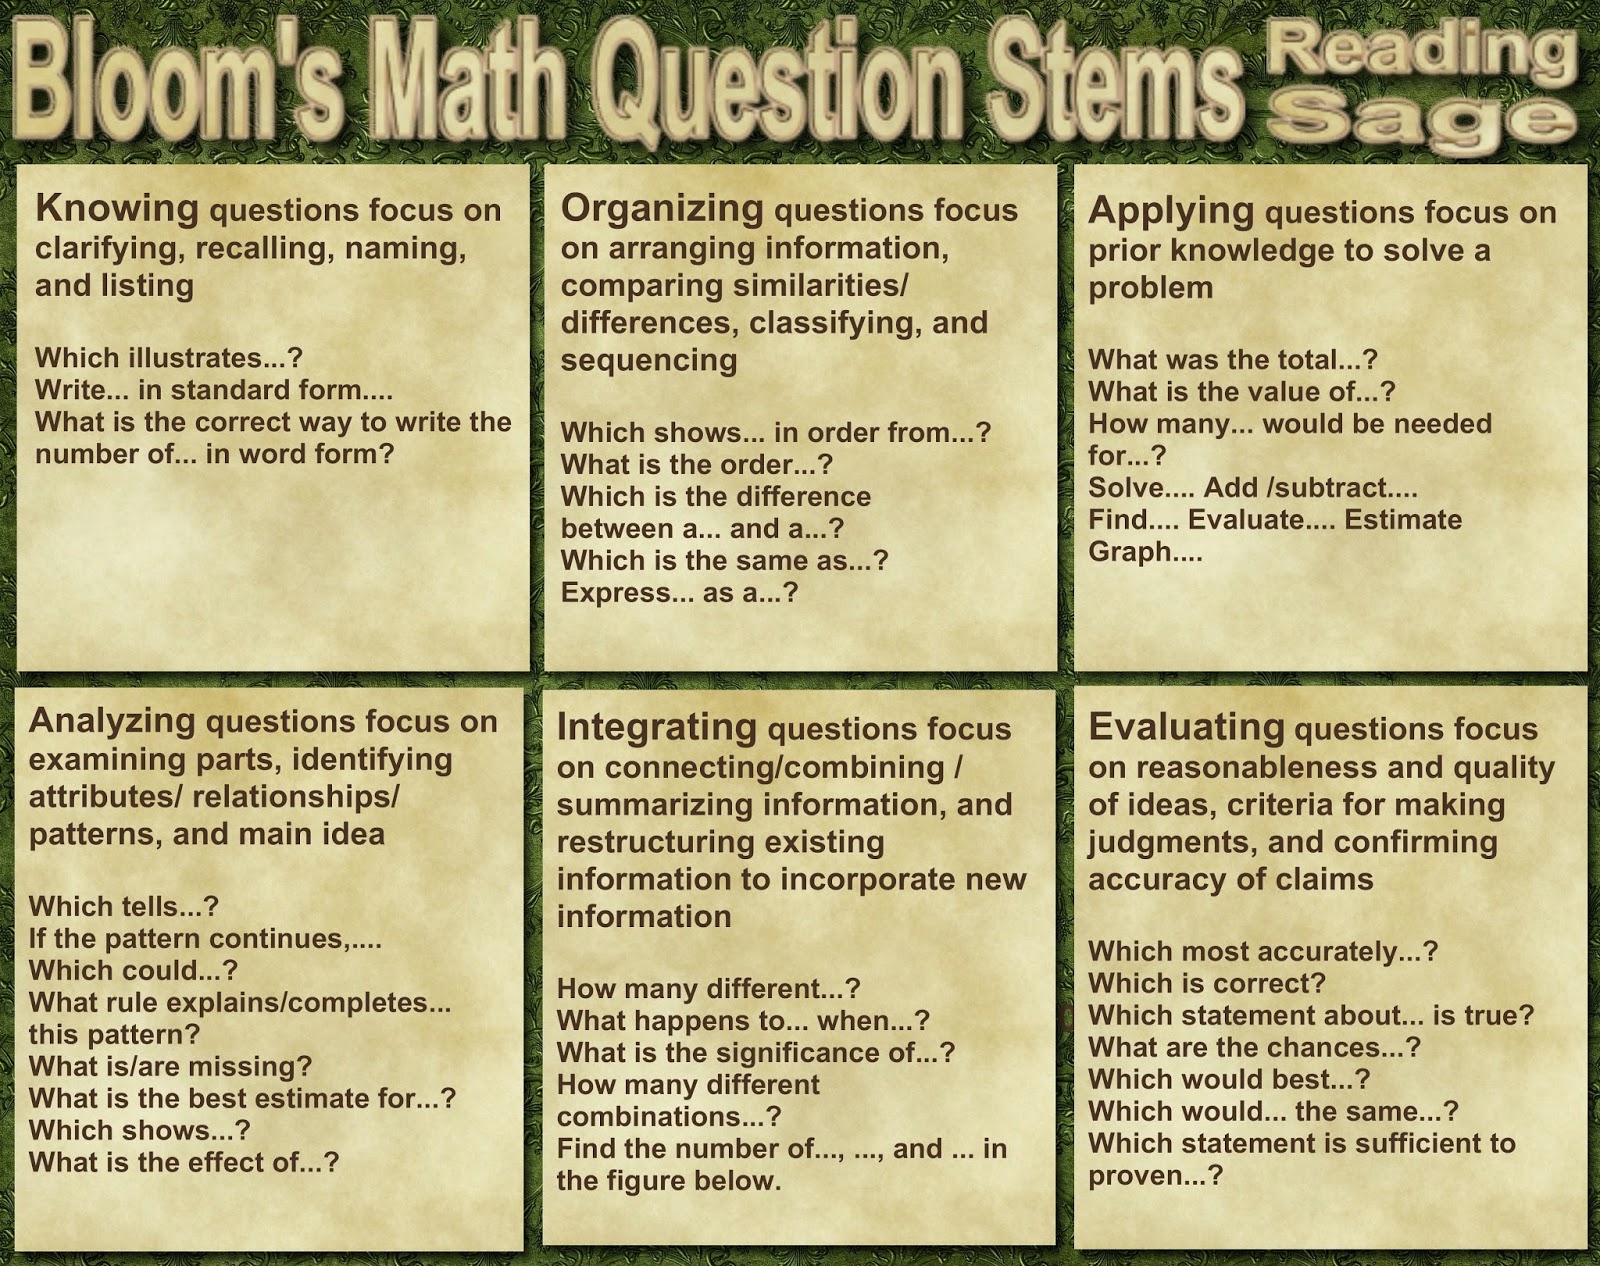 List of unsolved problems in mathematics